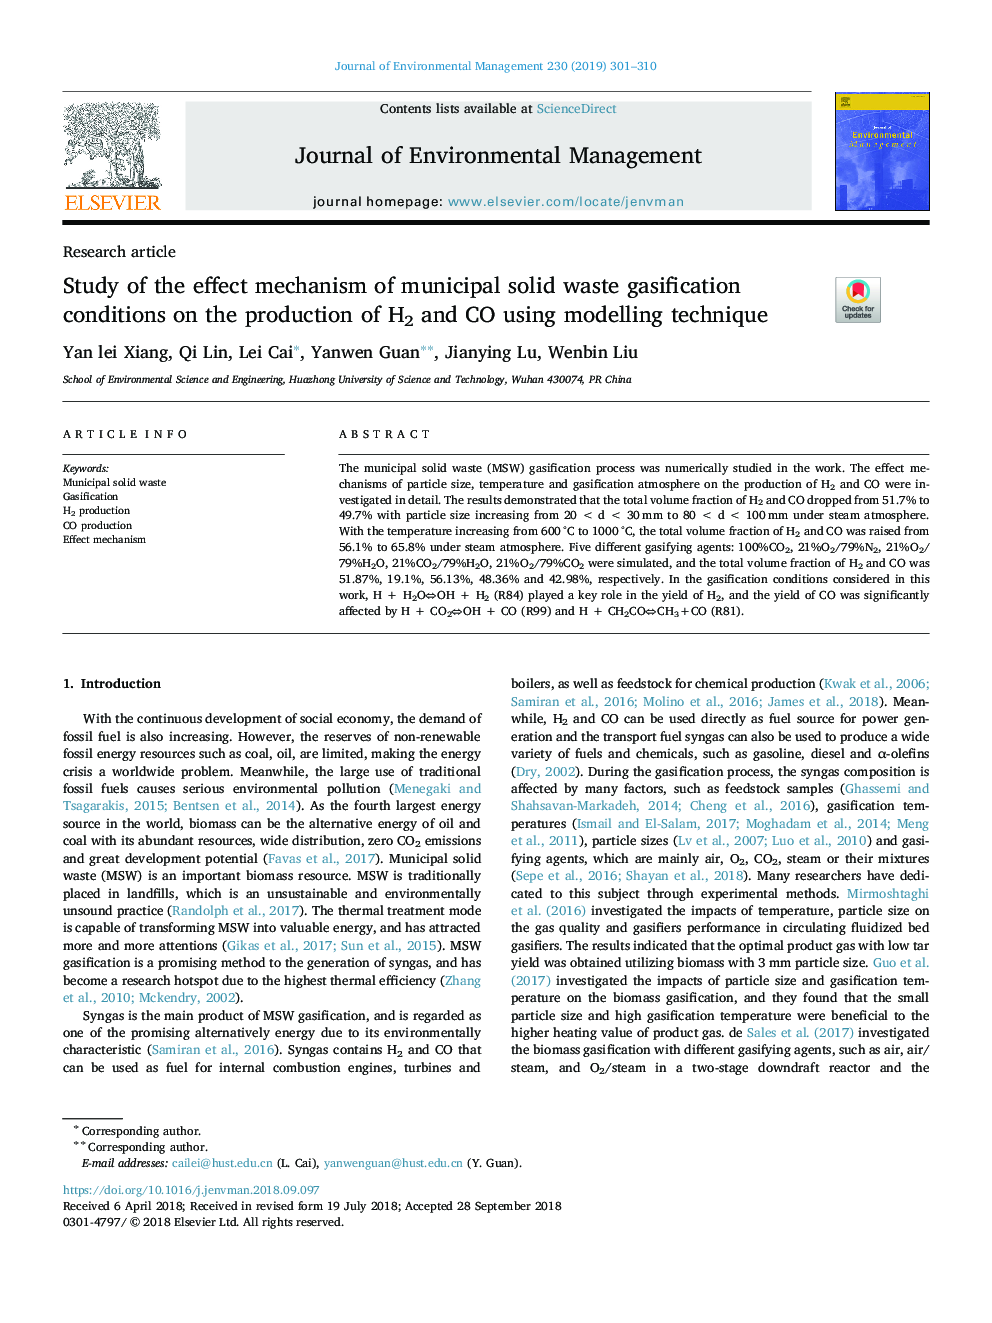 Study of the effect mechanism of municipal solid waste gasification conditions on the production of H2 and CO using modelling technique